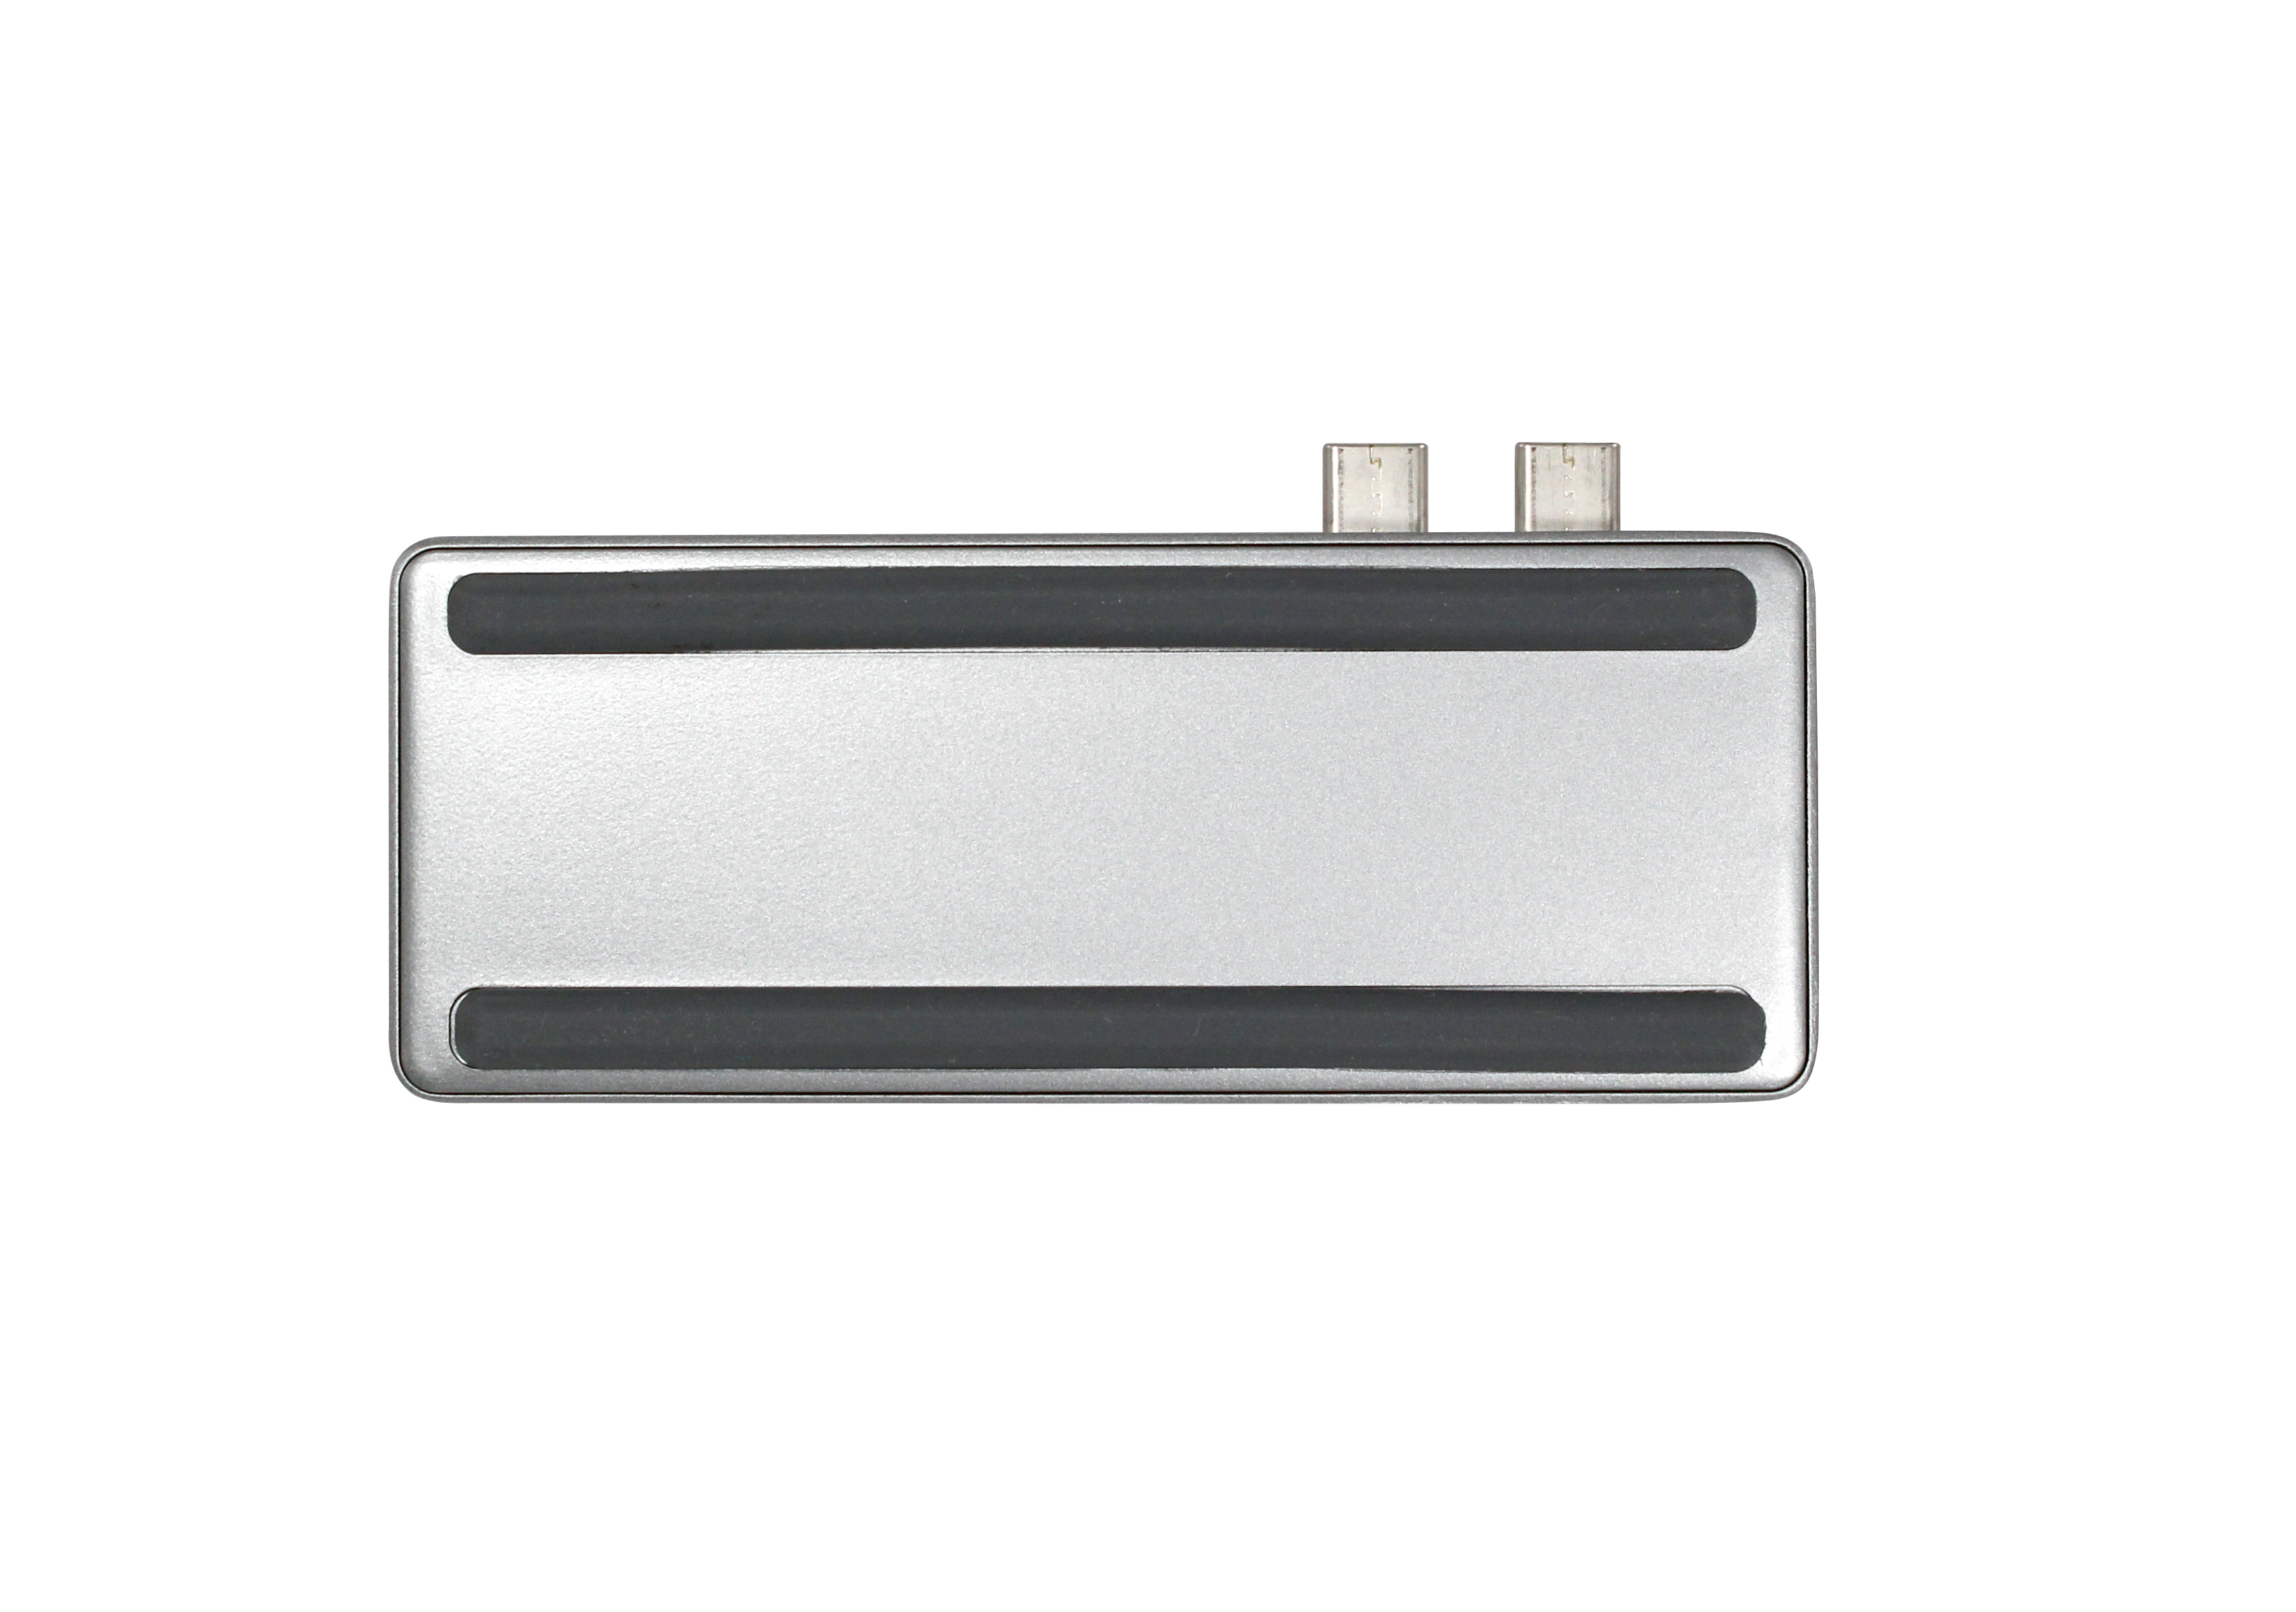 USB Type-C Hub for the New MacBook Pro - Bottom View